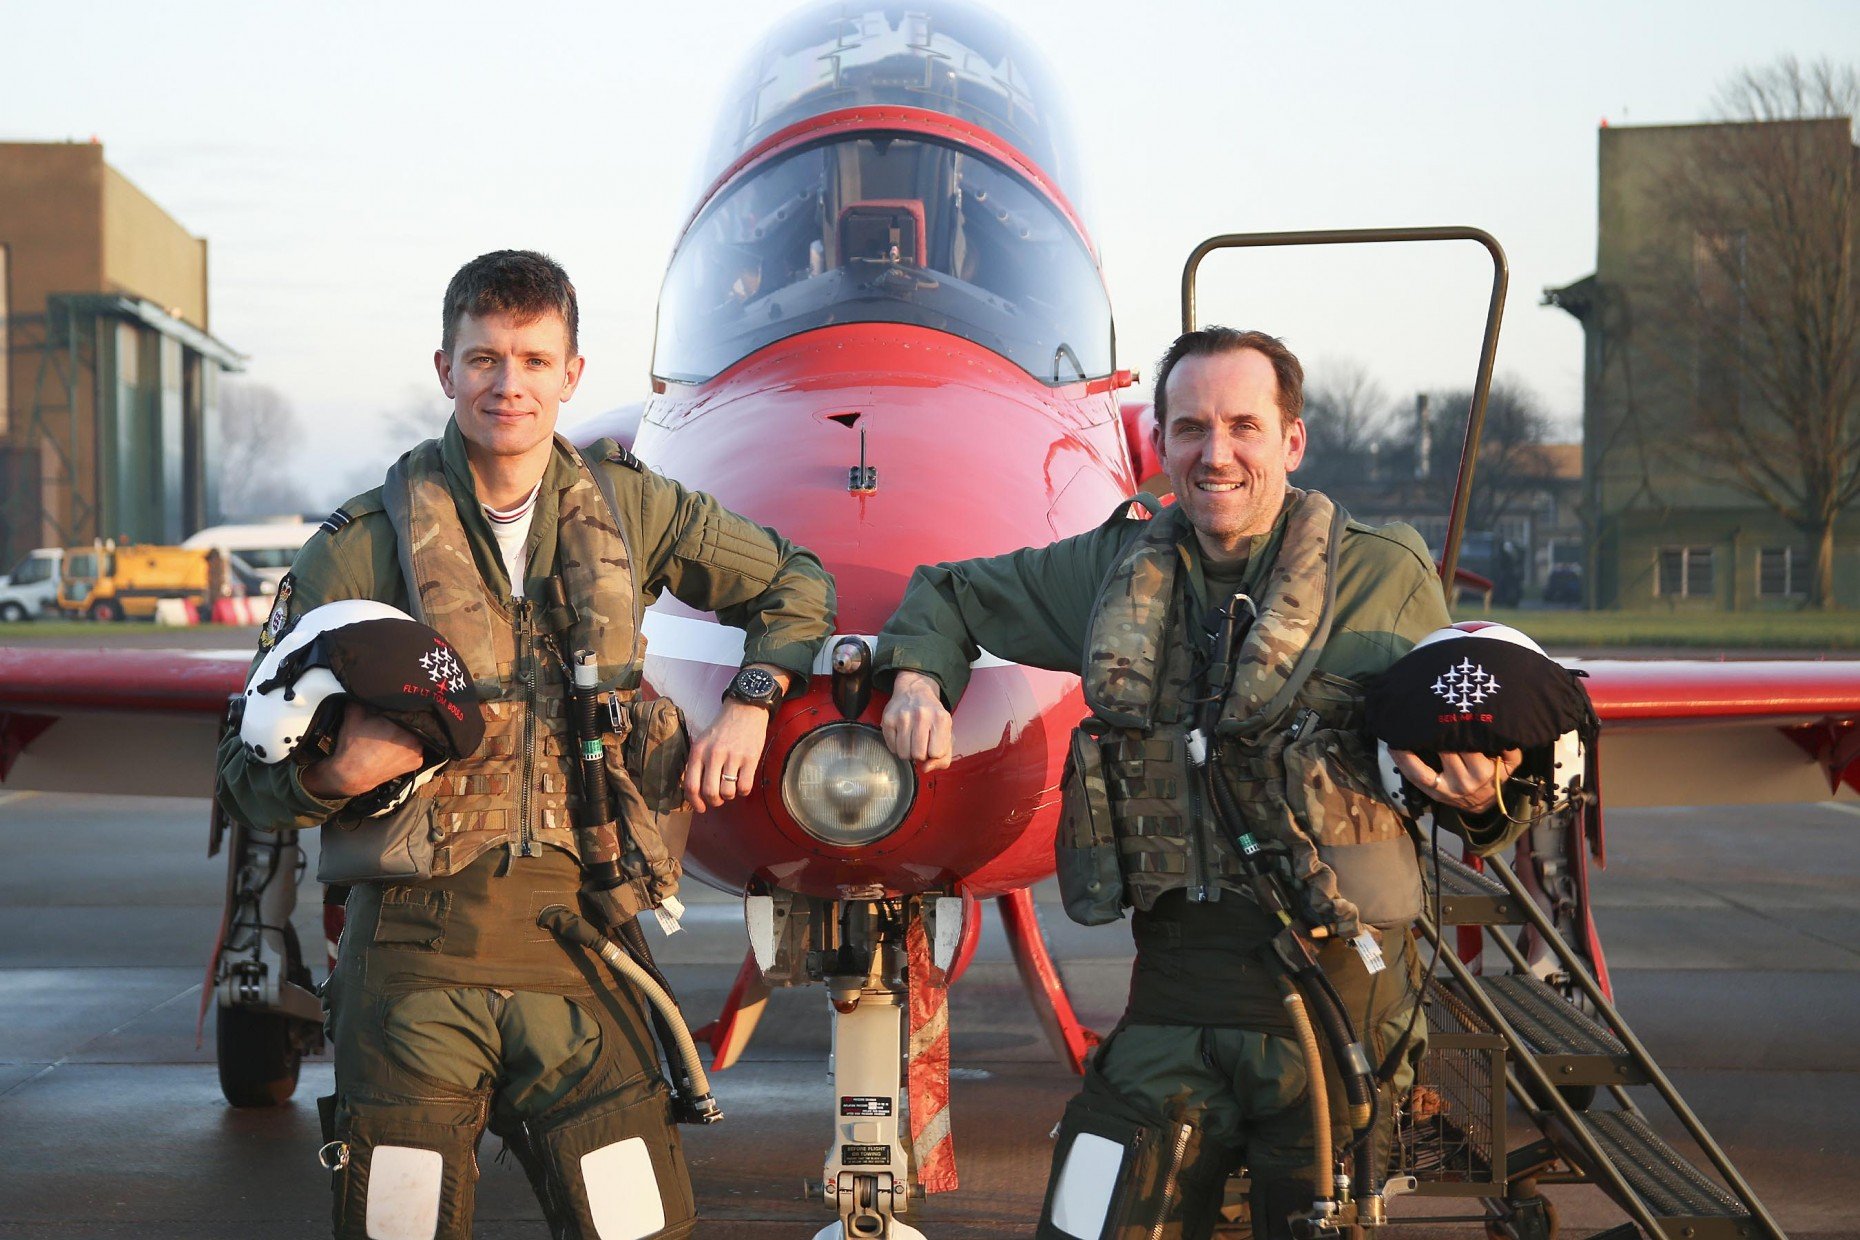 Presenter Ben Miller straps into a jet from the Royal Air Force Aerobatic Team, the Red Arrows, at RAF Scampton, watched by Red 7, Flight Lieutenant Tom Bould, for ITV’s new show, It’s Not Rocket Science. Picture by Corporal Steve Buckley, MoD/Crown Copyright 2016.